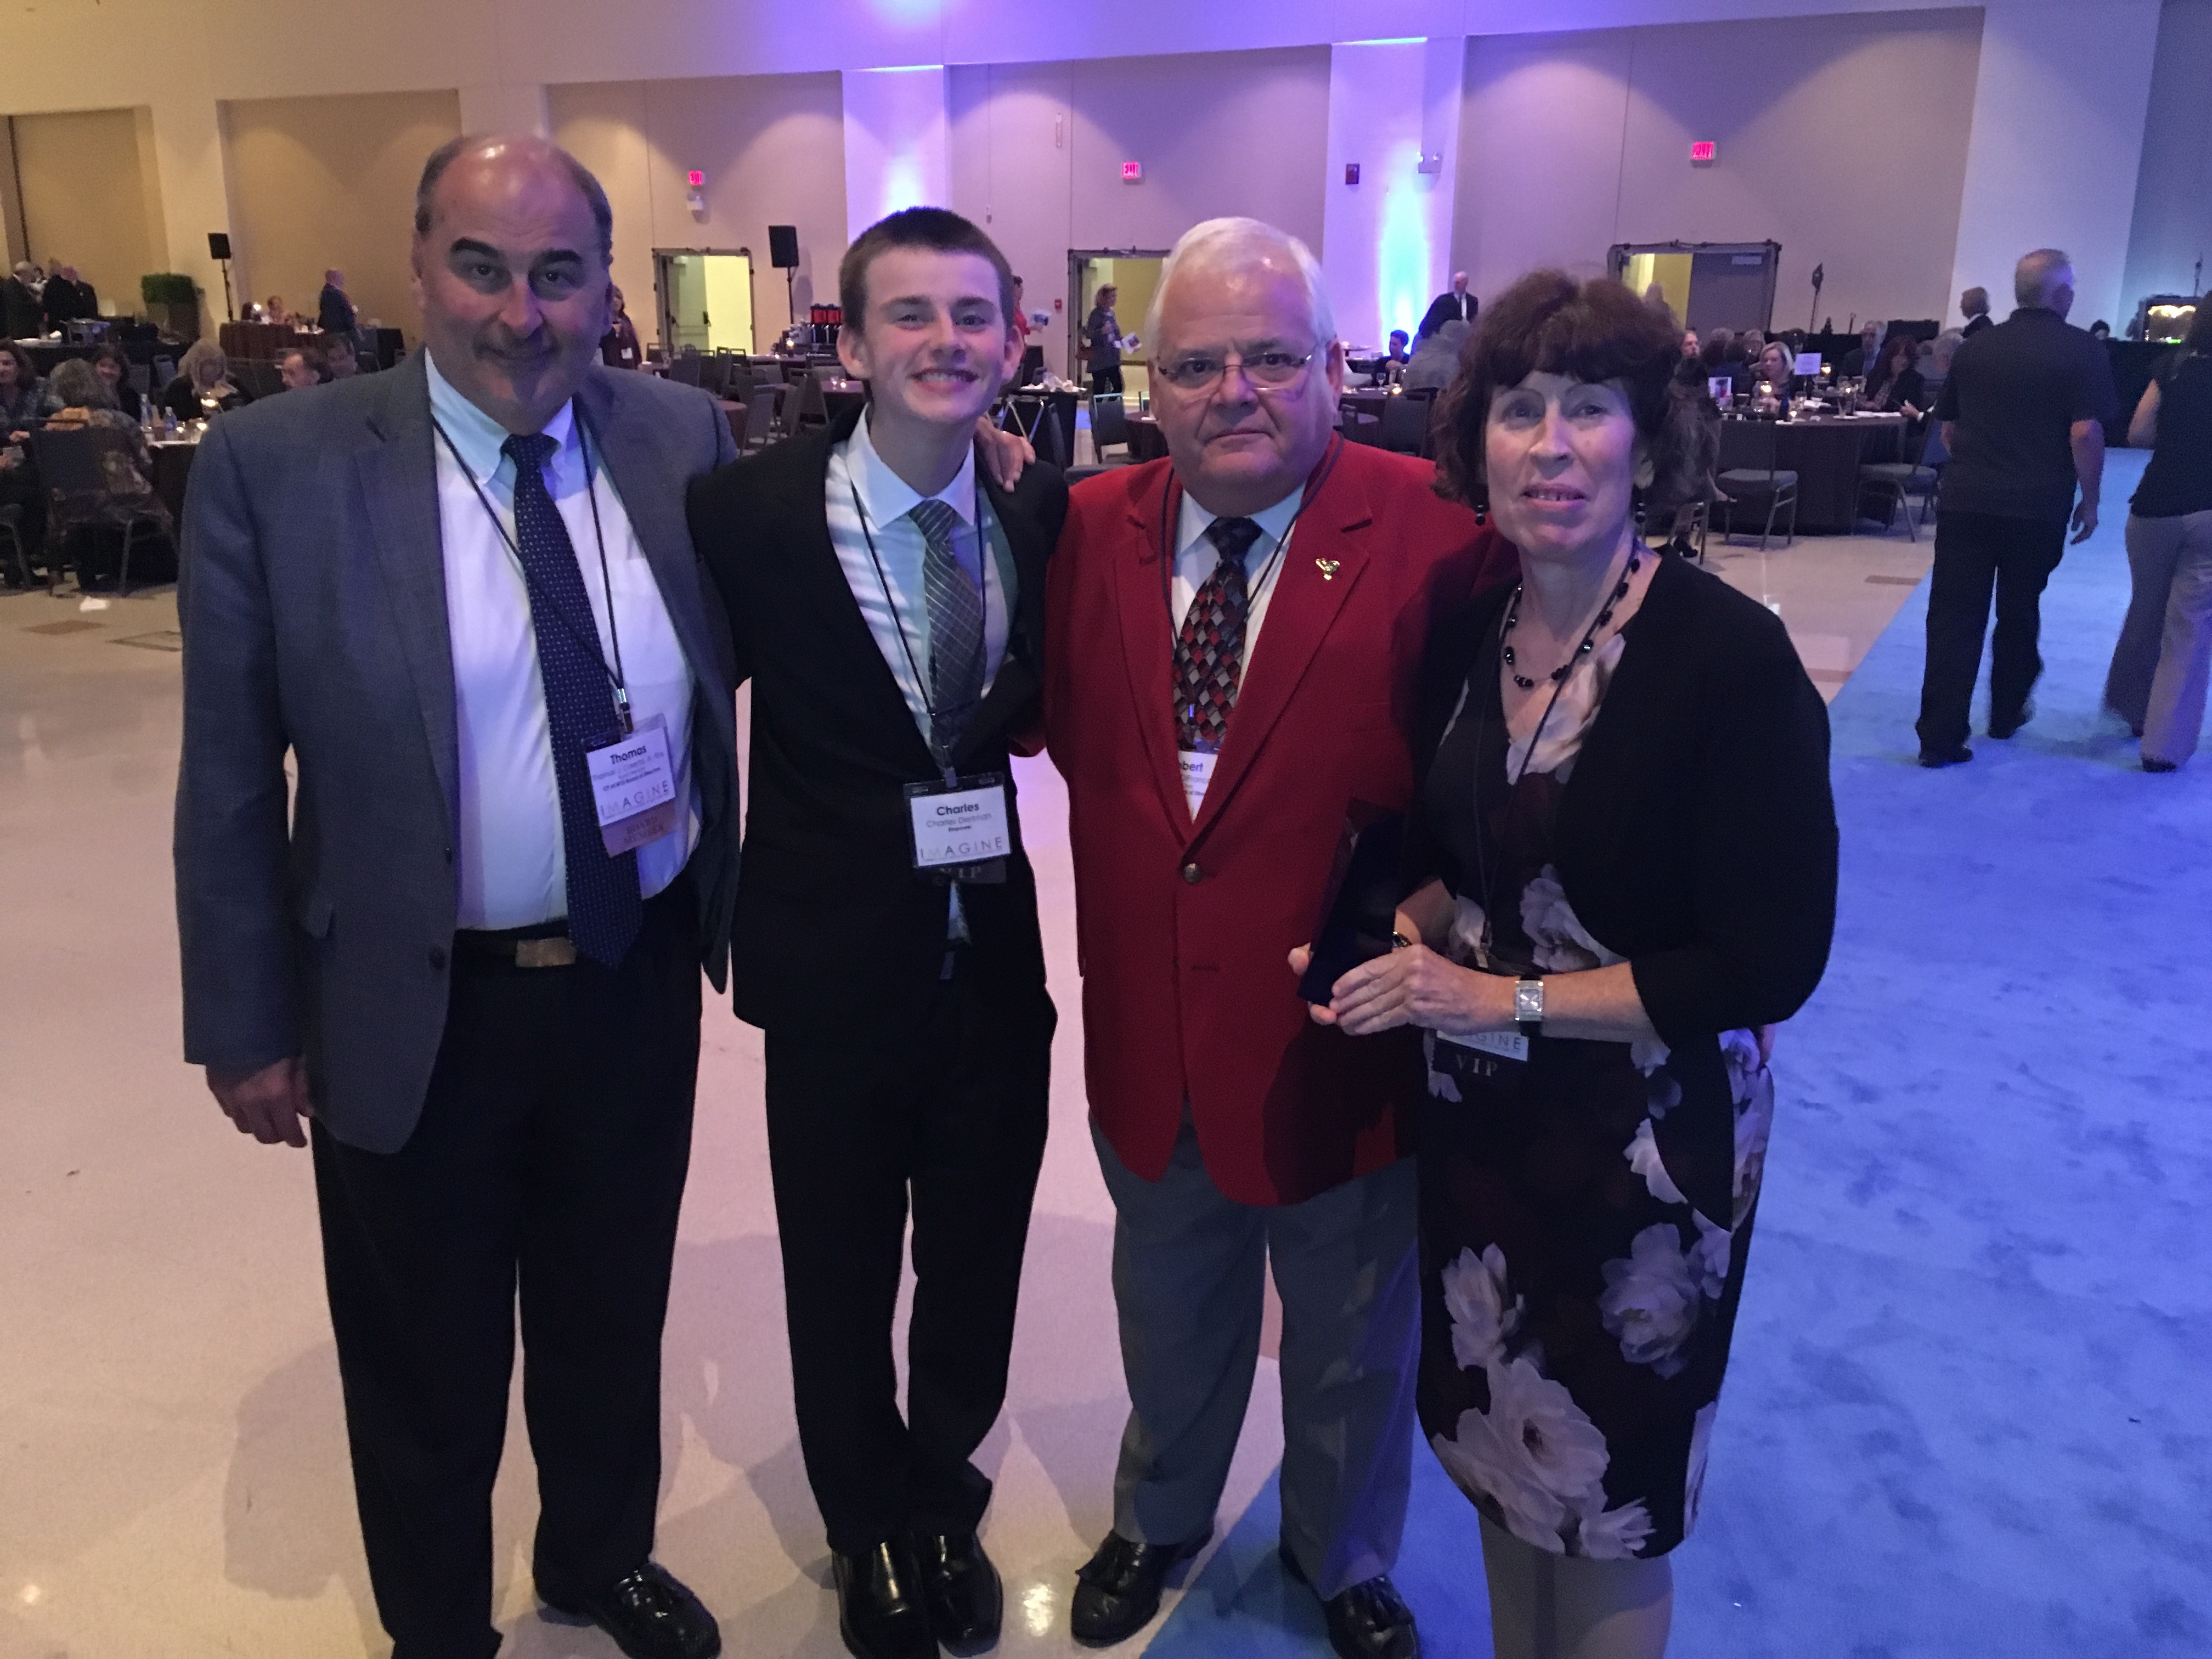 From left to right: Empower BOD member Tom Caserta, Charles Dieteman, Empower BOD member and Past President Bob DiFrancesco and KimKiely